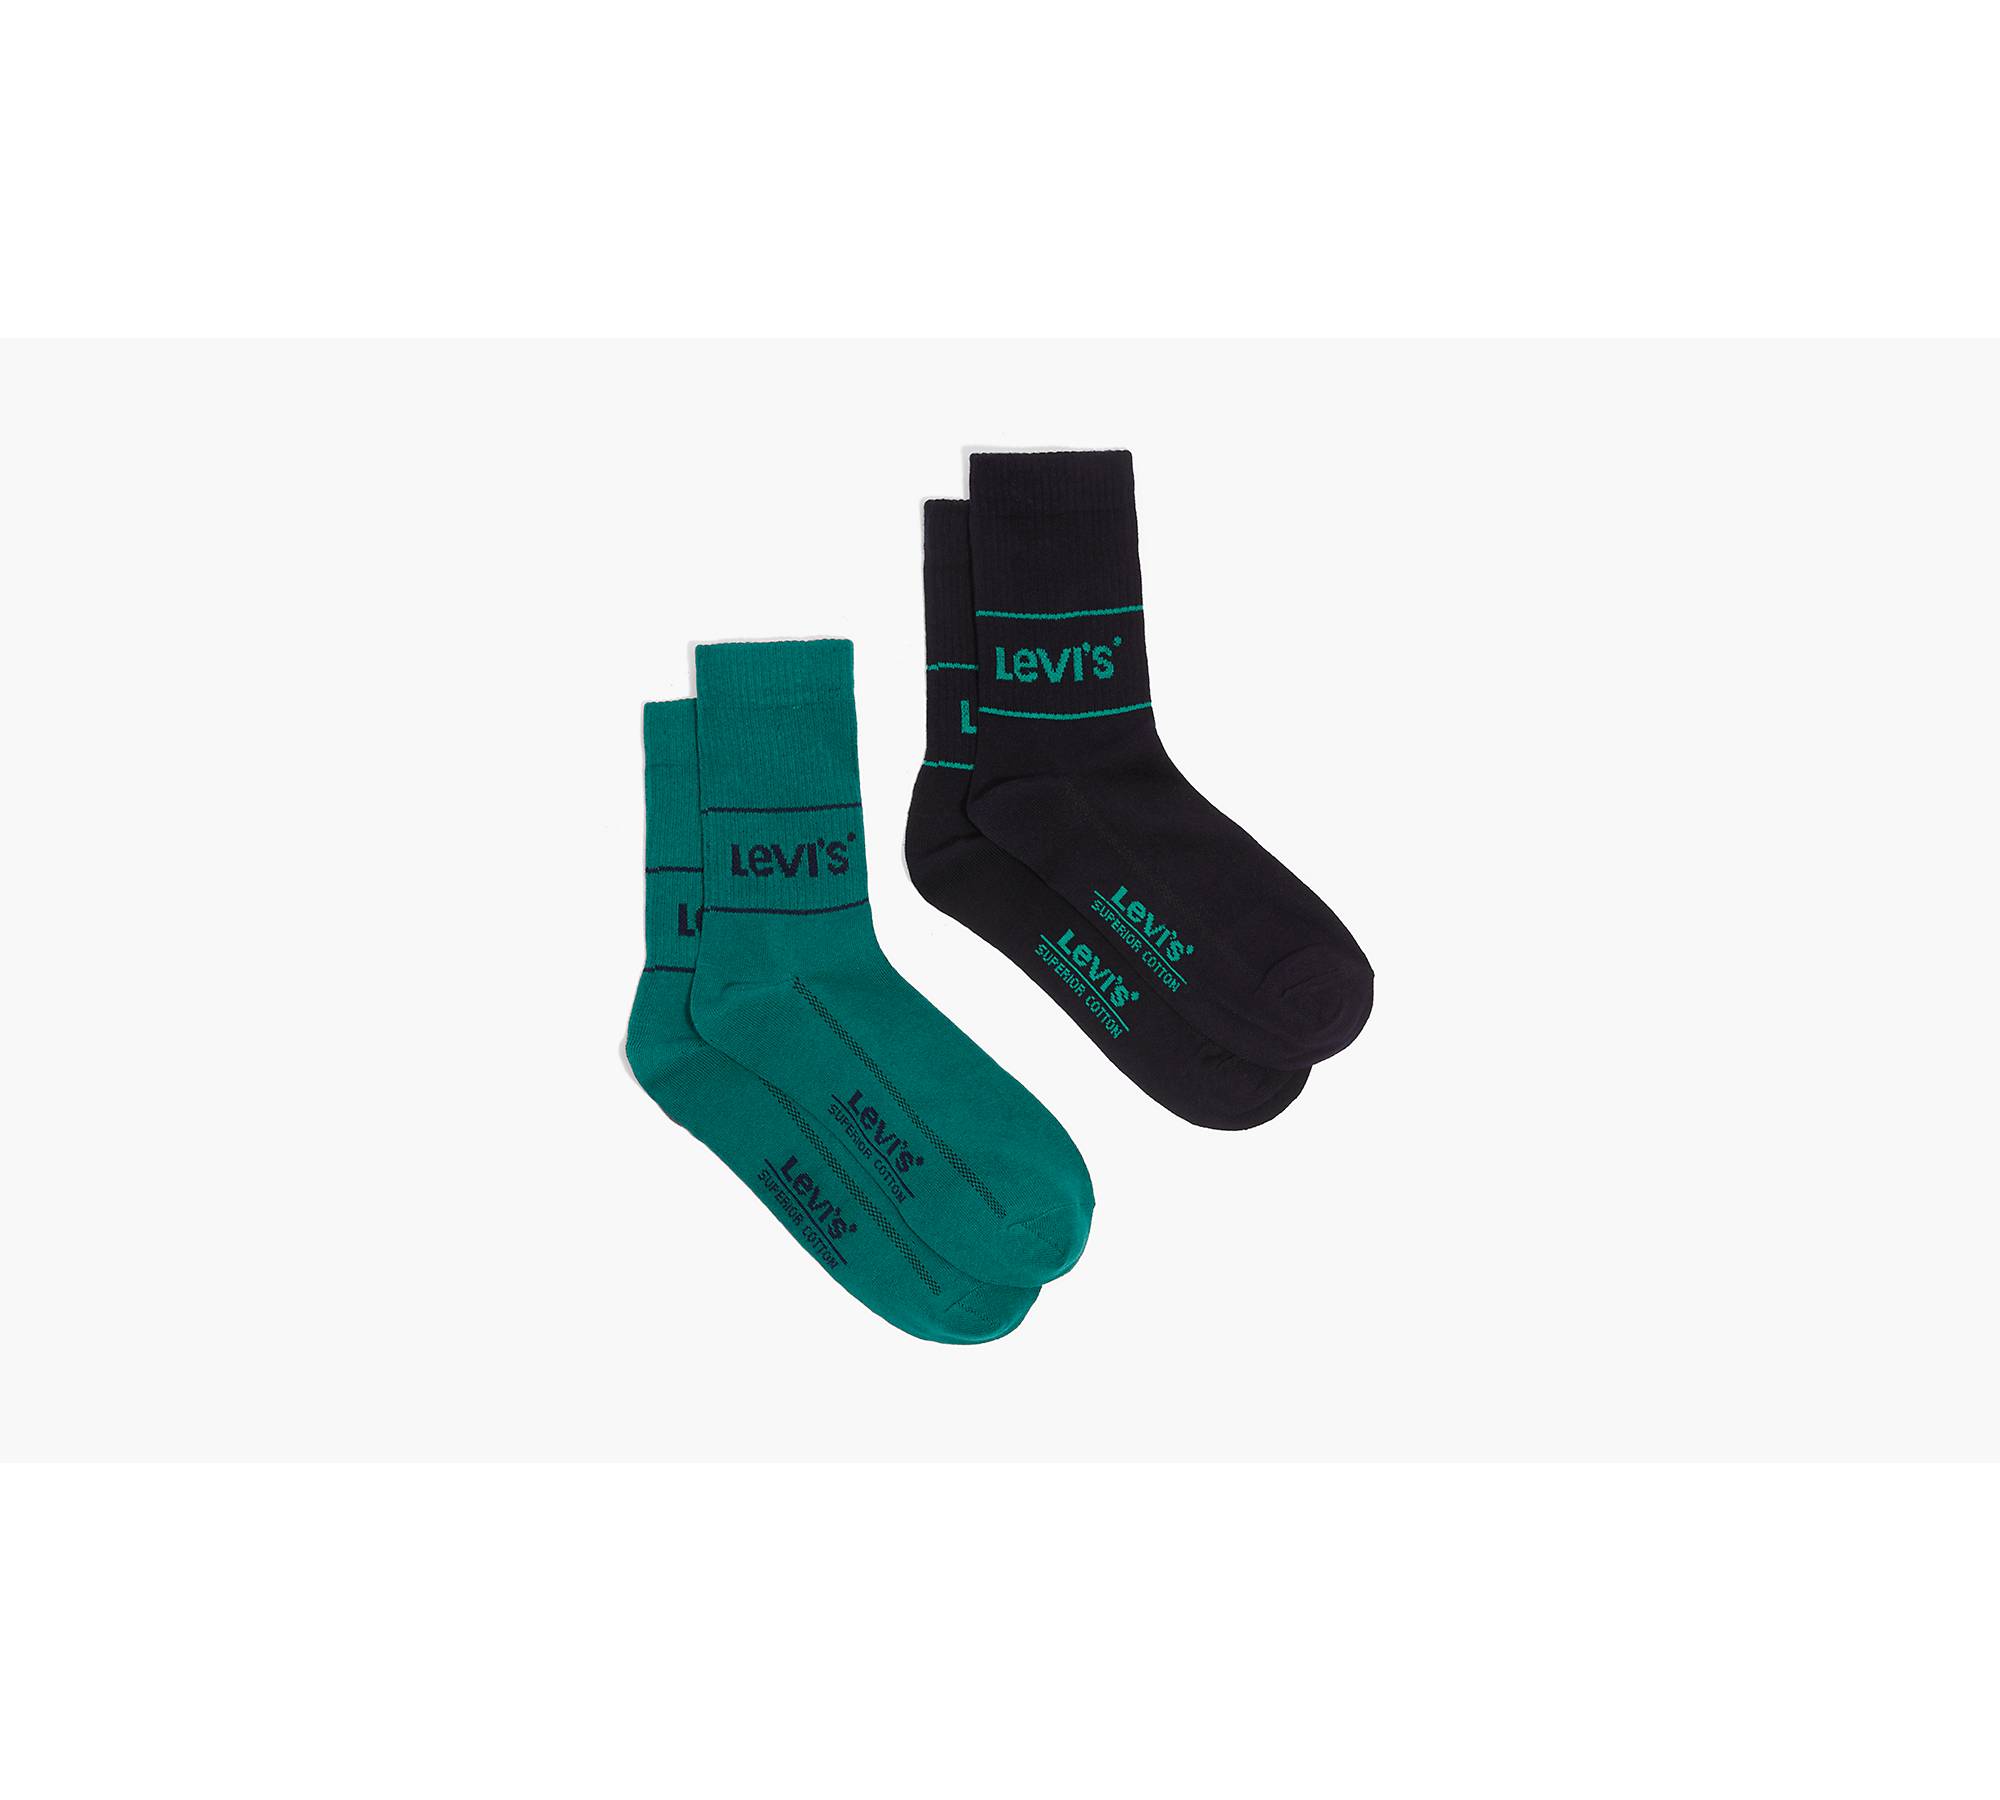 Fitness Cotton Ankle Socks 2-Pack